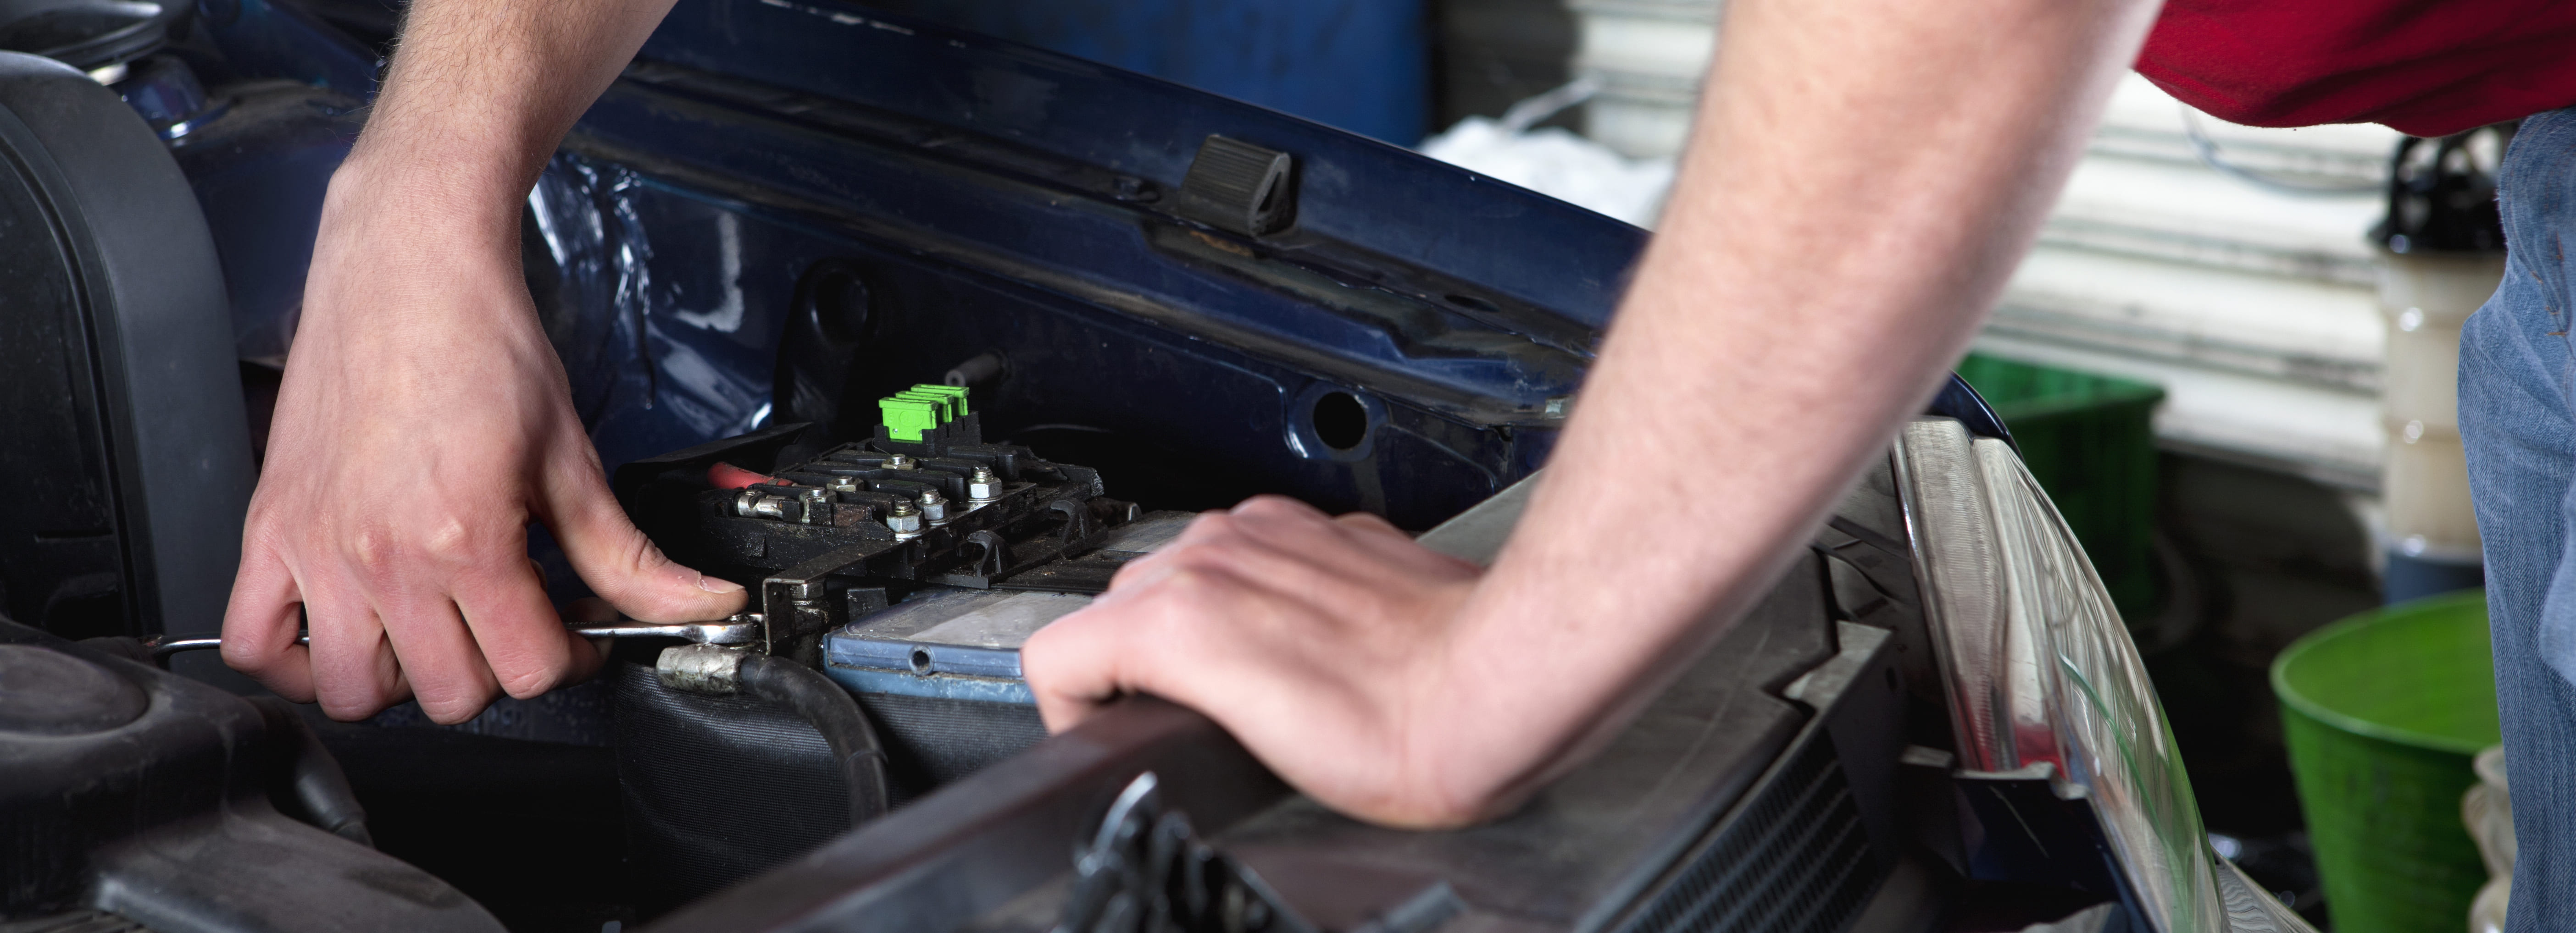 Learn how to install a car battery safely